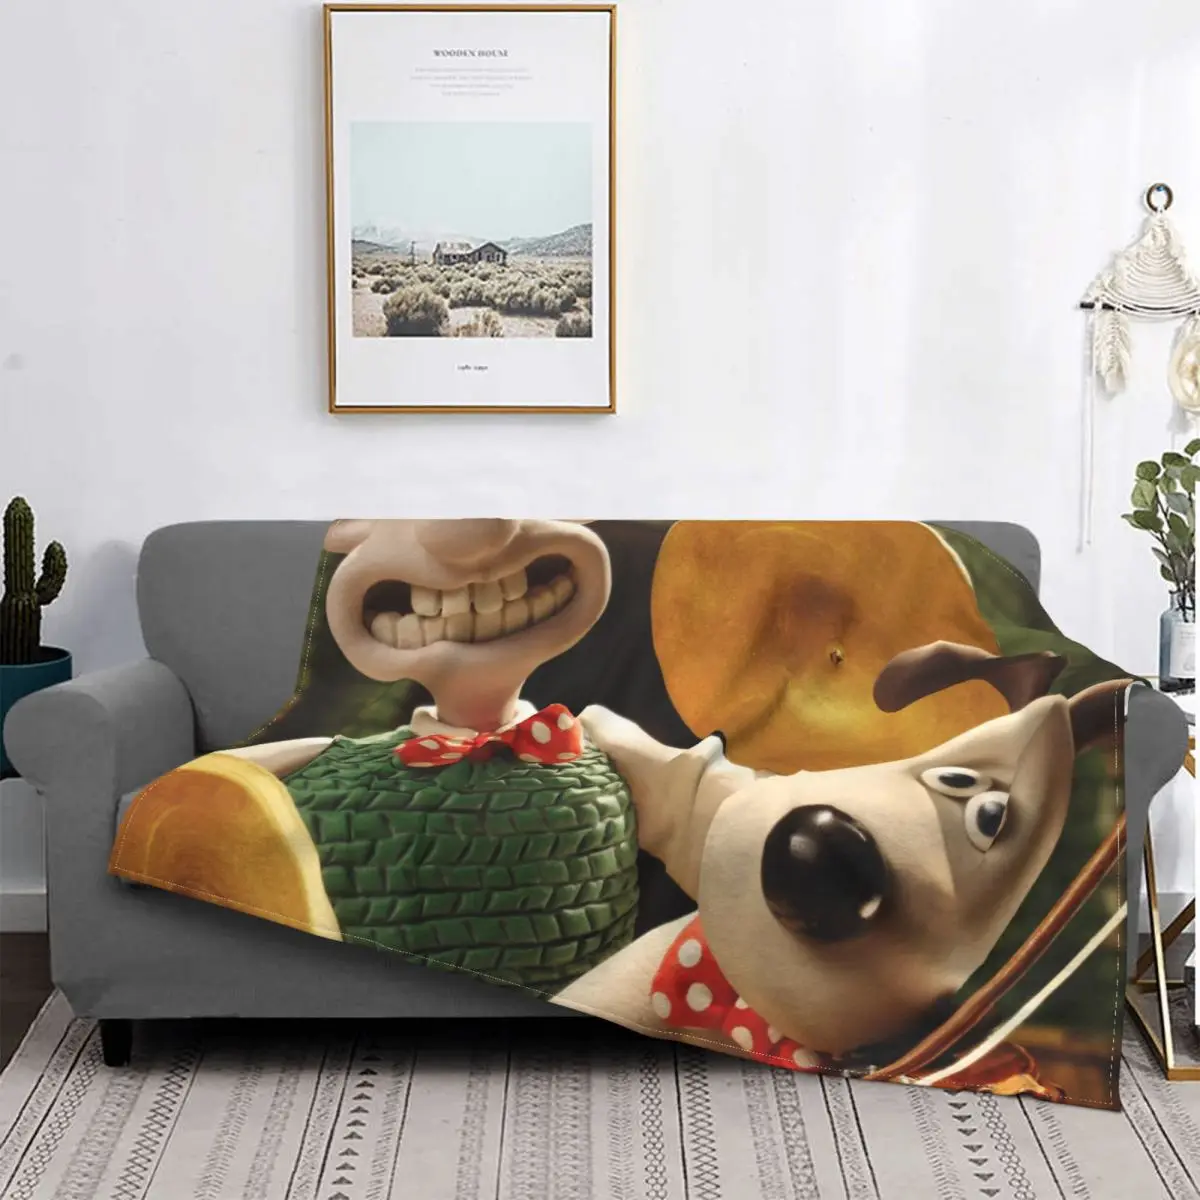 

Wallace Gromit Hilarious Animation Blanket Flannel Spring Autumn Play An Instrument Warm Throws For Winter Bedding